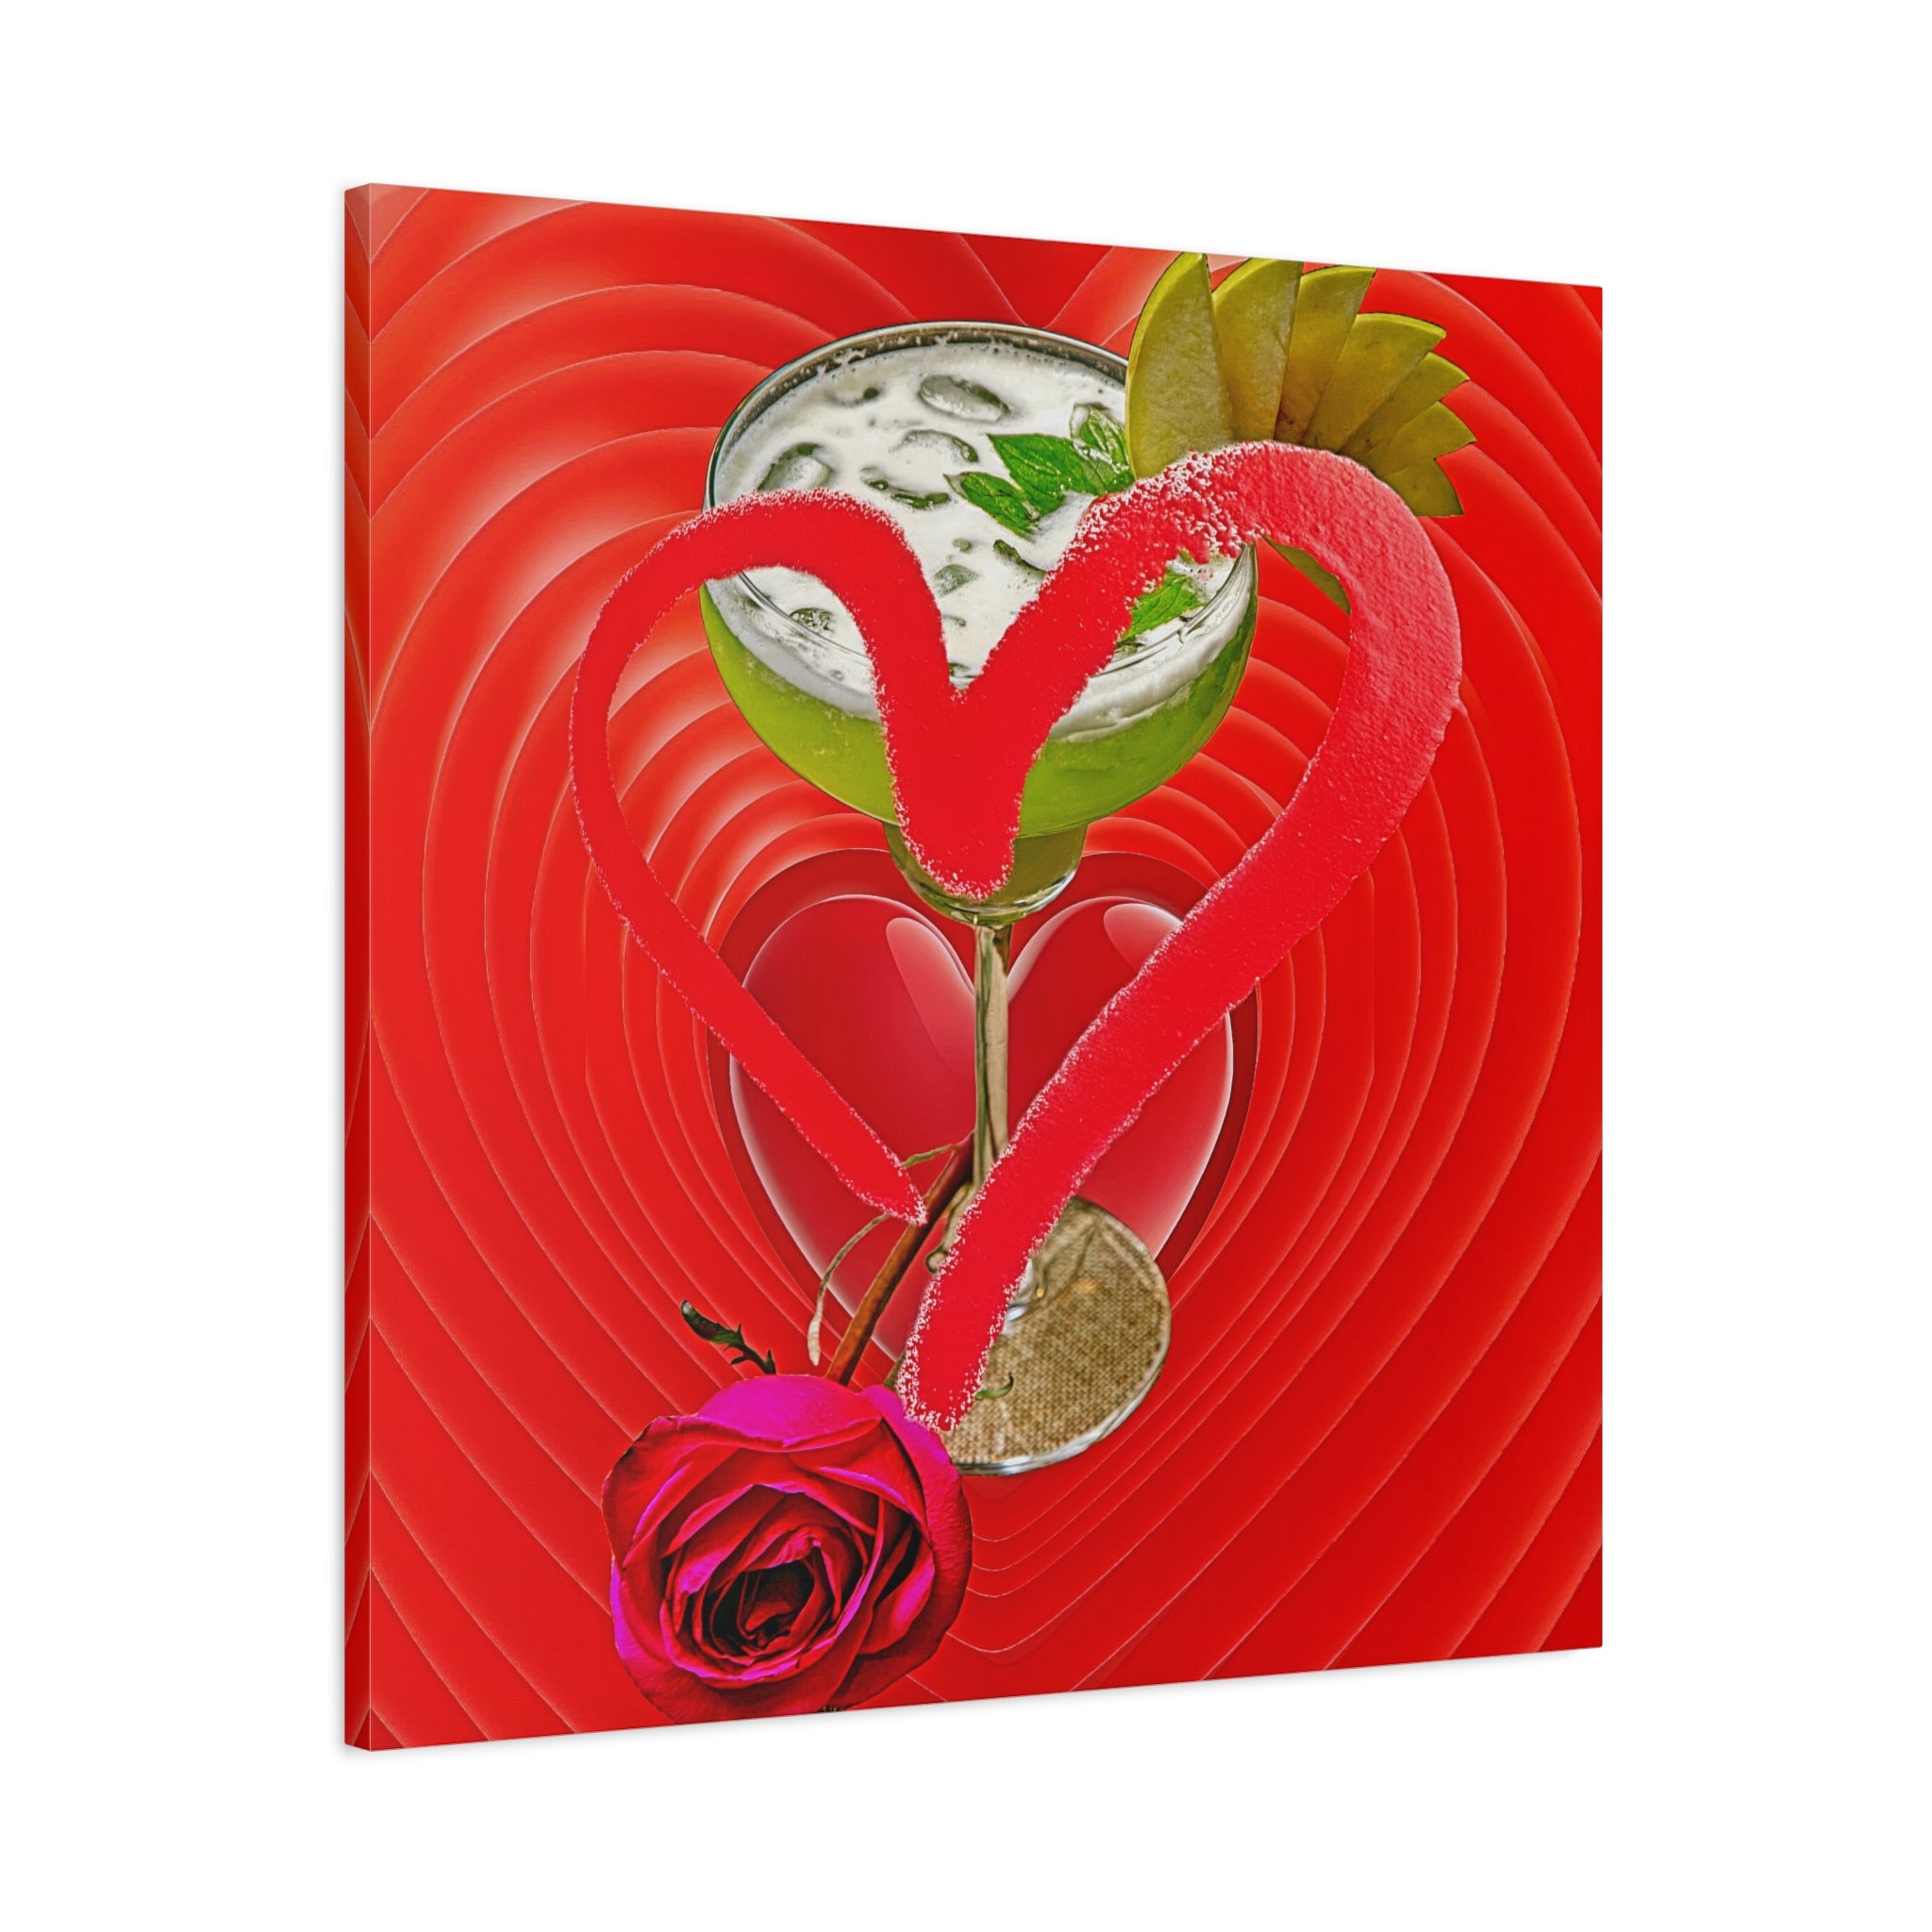 Wall Art LOVE MARGARITA Canvas Print Painting Original Giclee 40X30 GW Nice Beauty Food, Wine & Drinks Design Fit Red Hot House Home Living Office Gift Ready to Hang